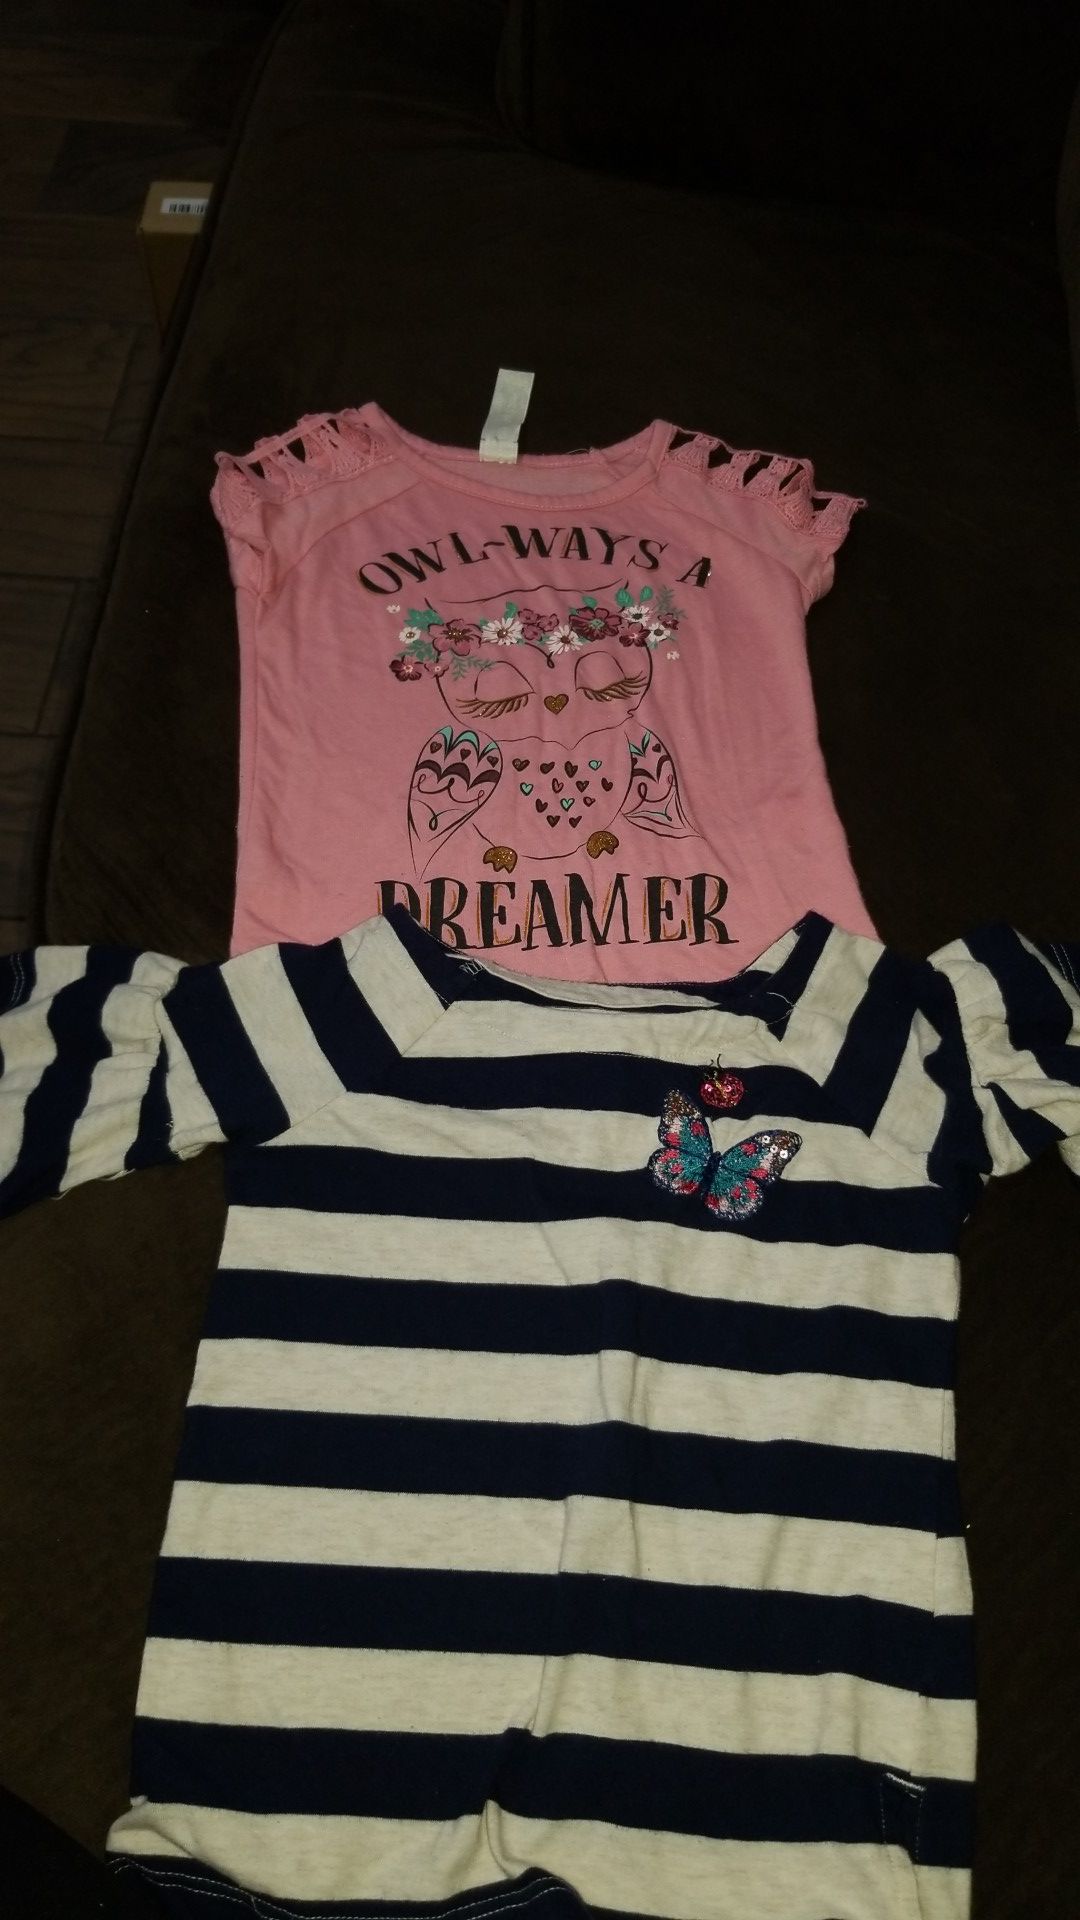 2 girl shirts size 4 and 5